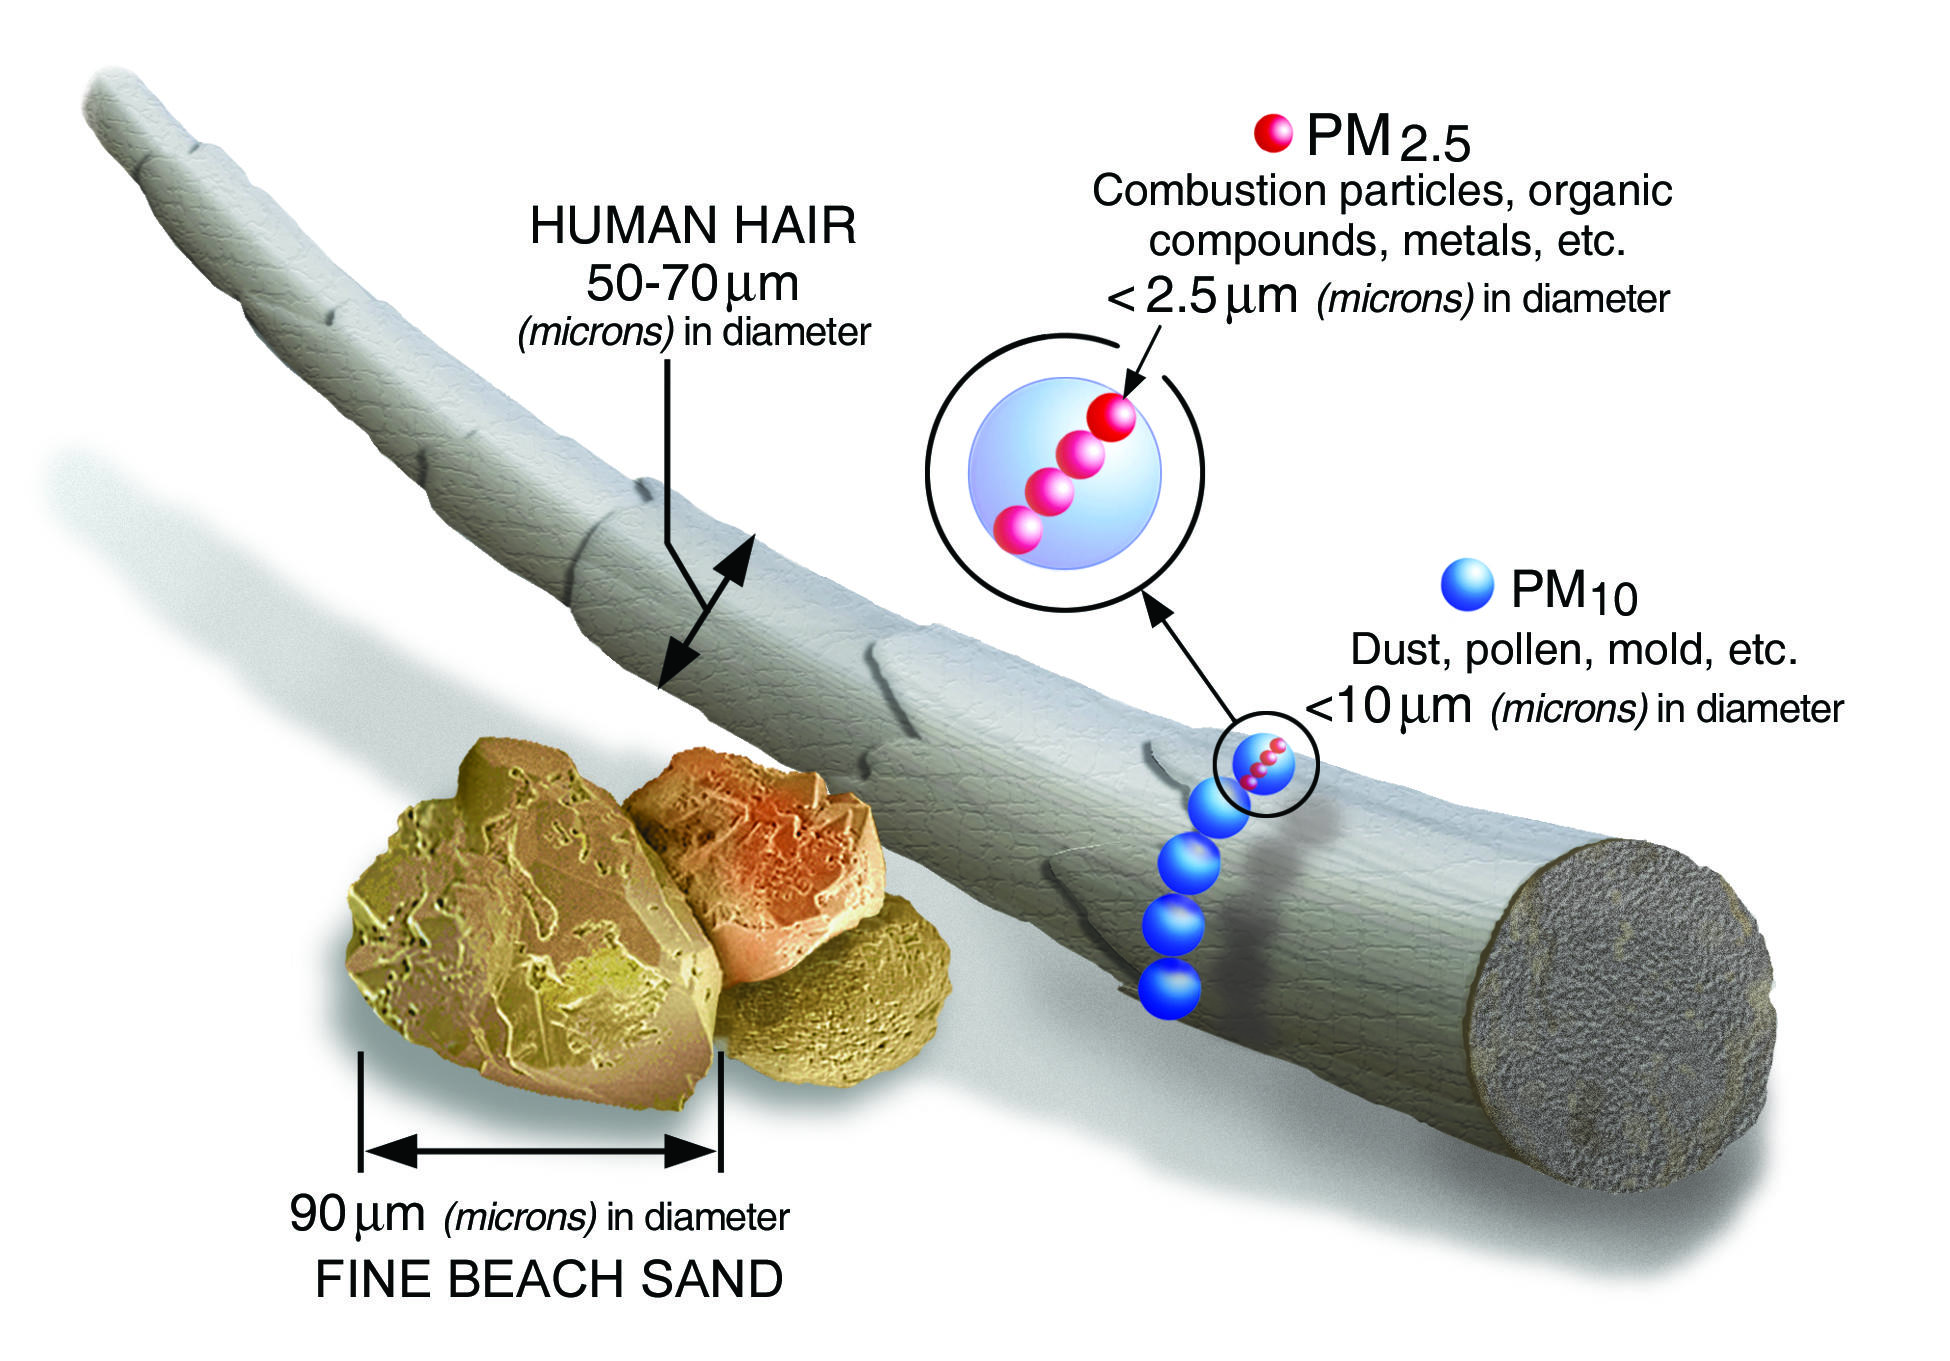 To-scale graph illustrates how smoke particles are tinier than a human hair and fine beach sand.